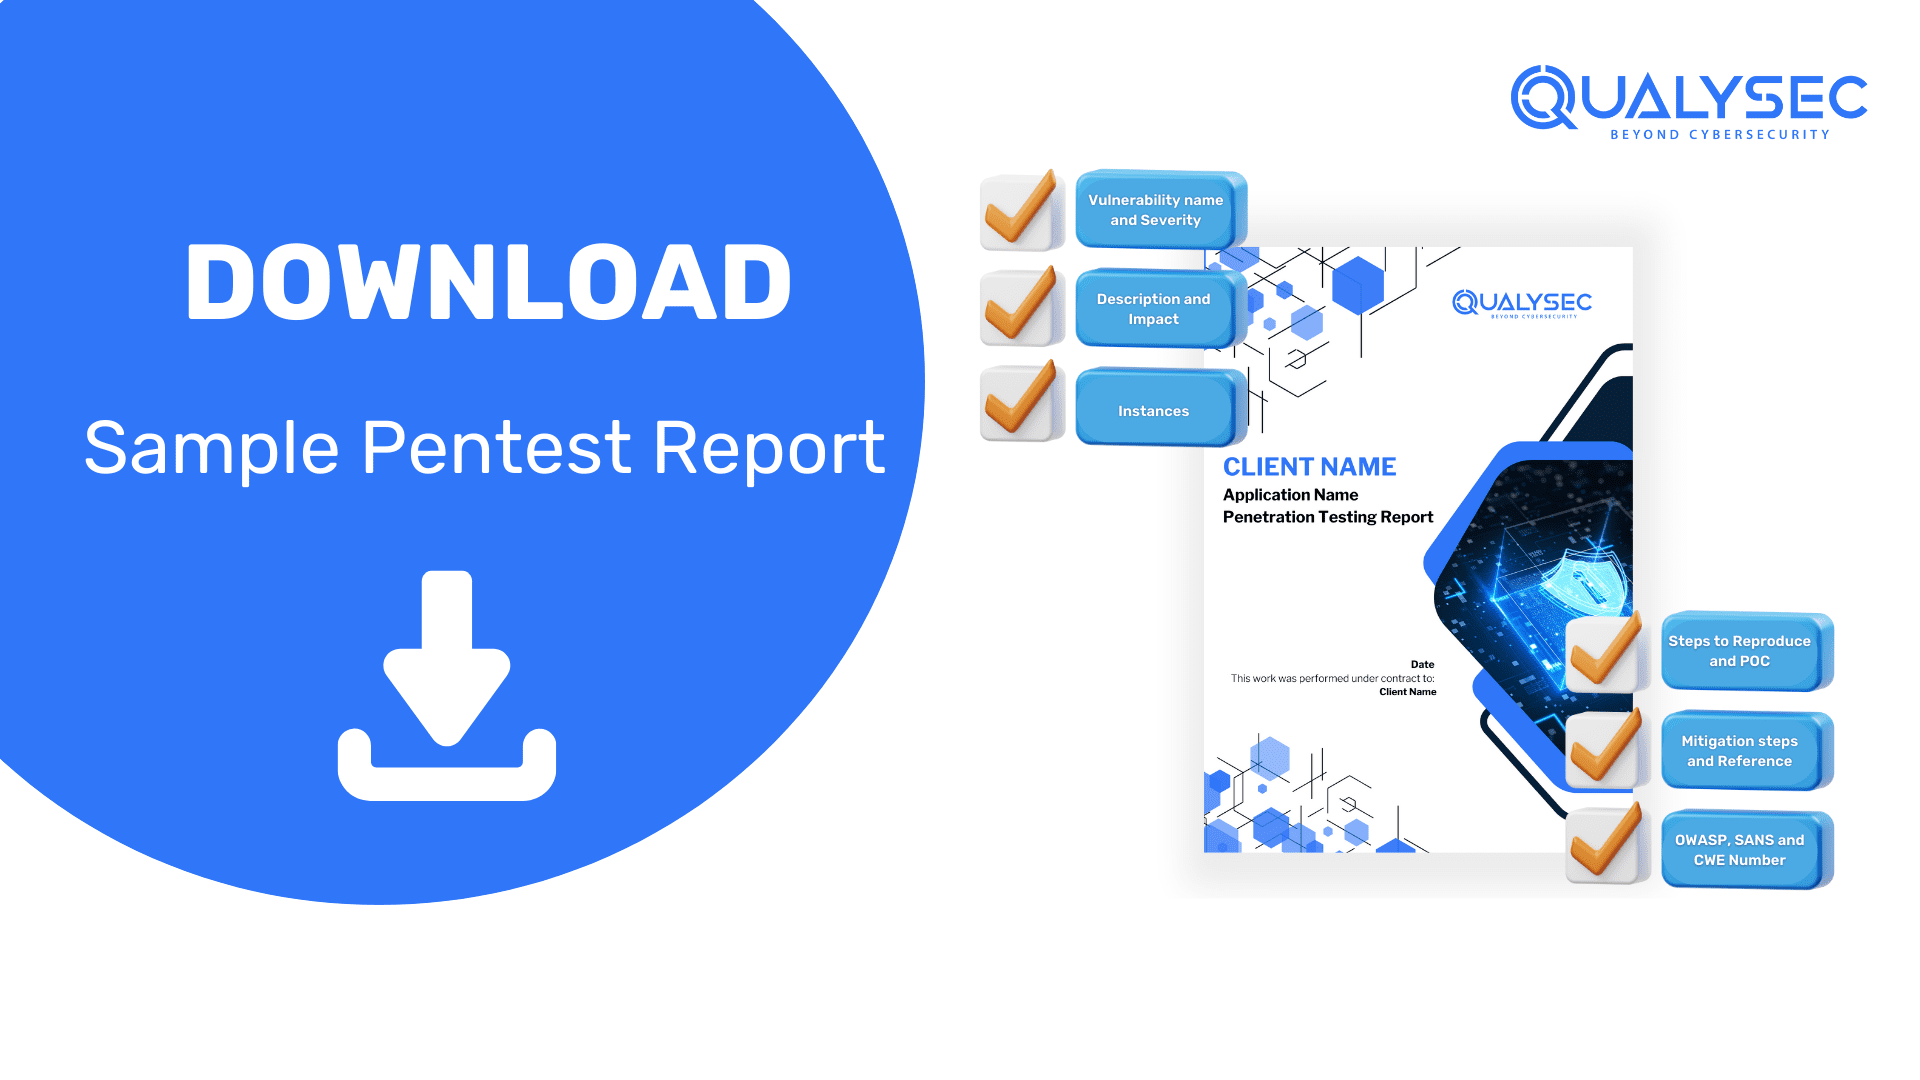 Penetration Testing Report by Qualysec (Download)